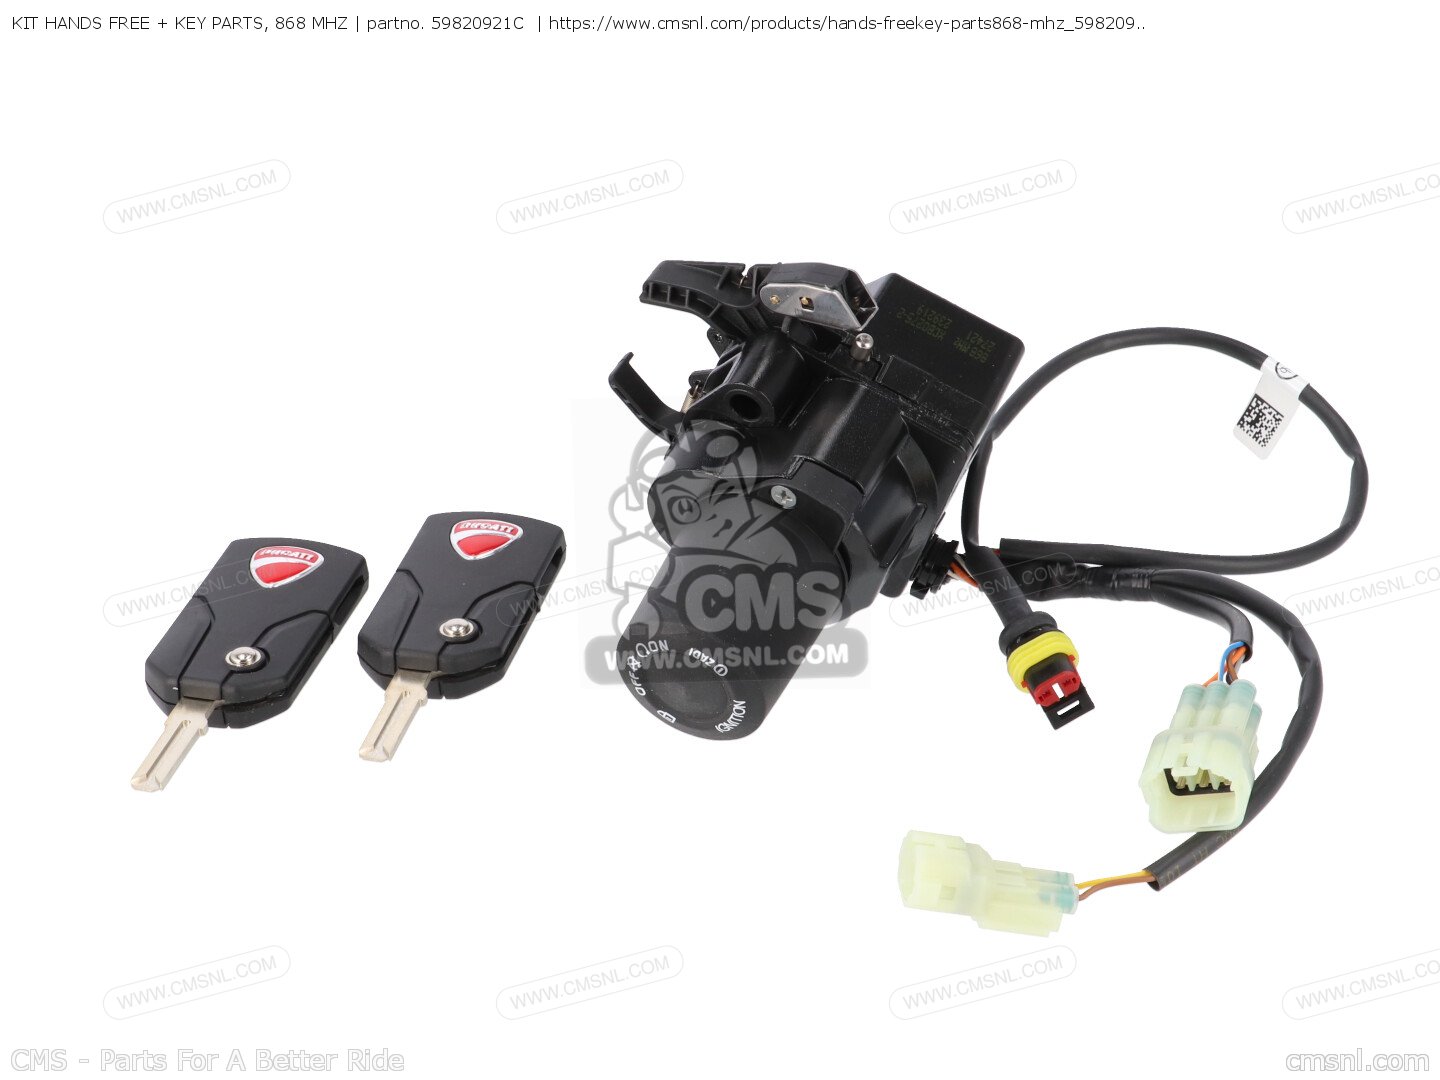 59820921C: Kit Hands Free + 2keyfob Spare Parts Ducati - buy the